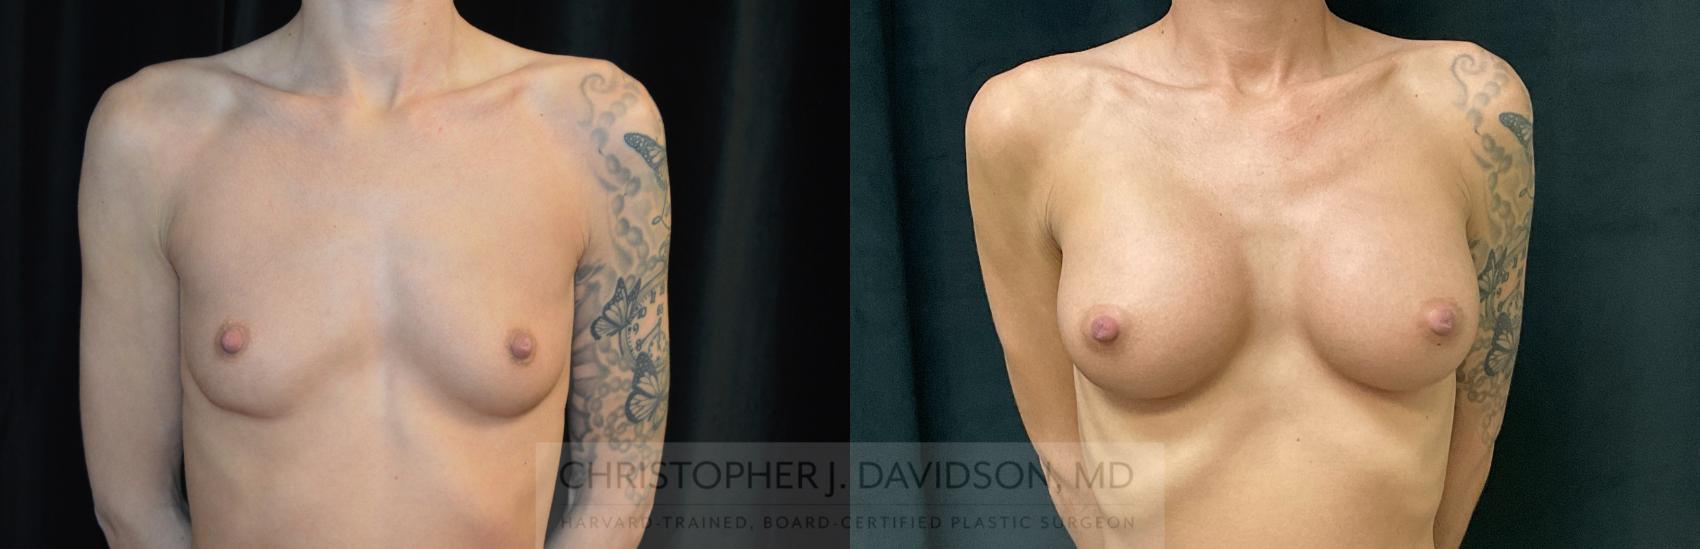 Breast Augmentation Case 282 Before & After Front | Boston, MA | Christopher J. Davidson, MD